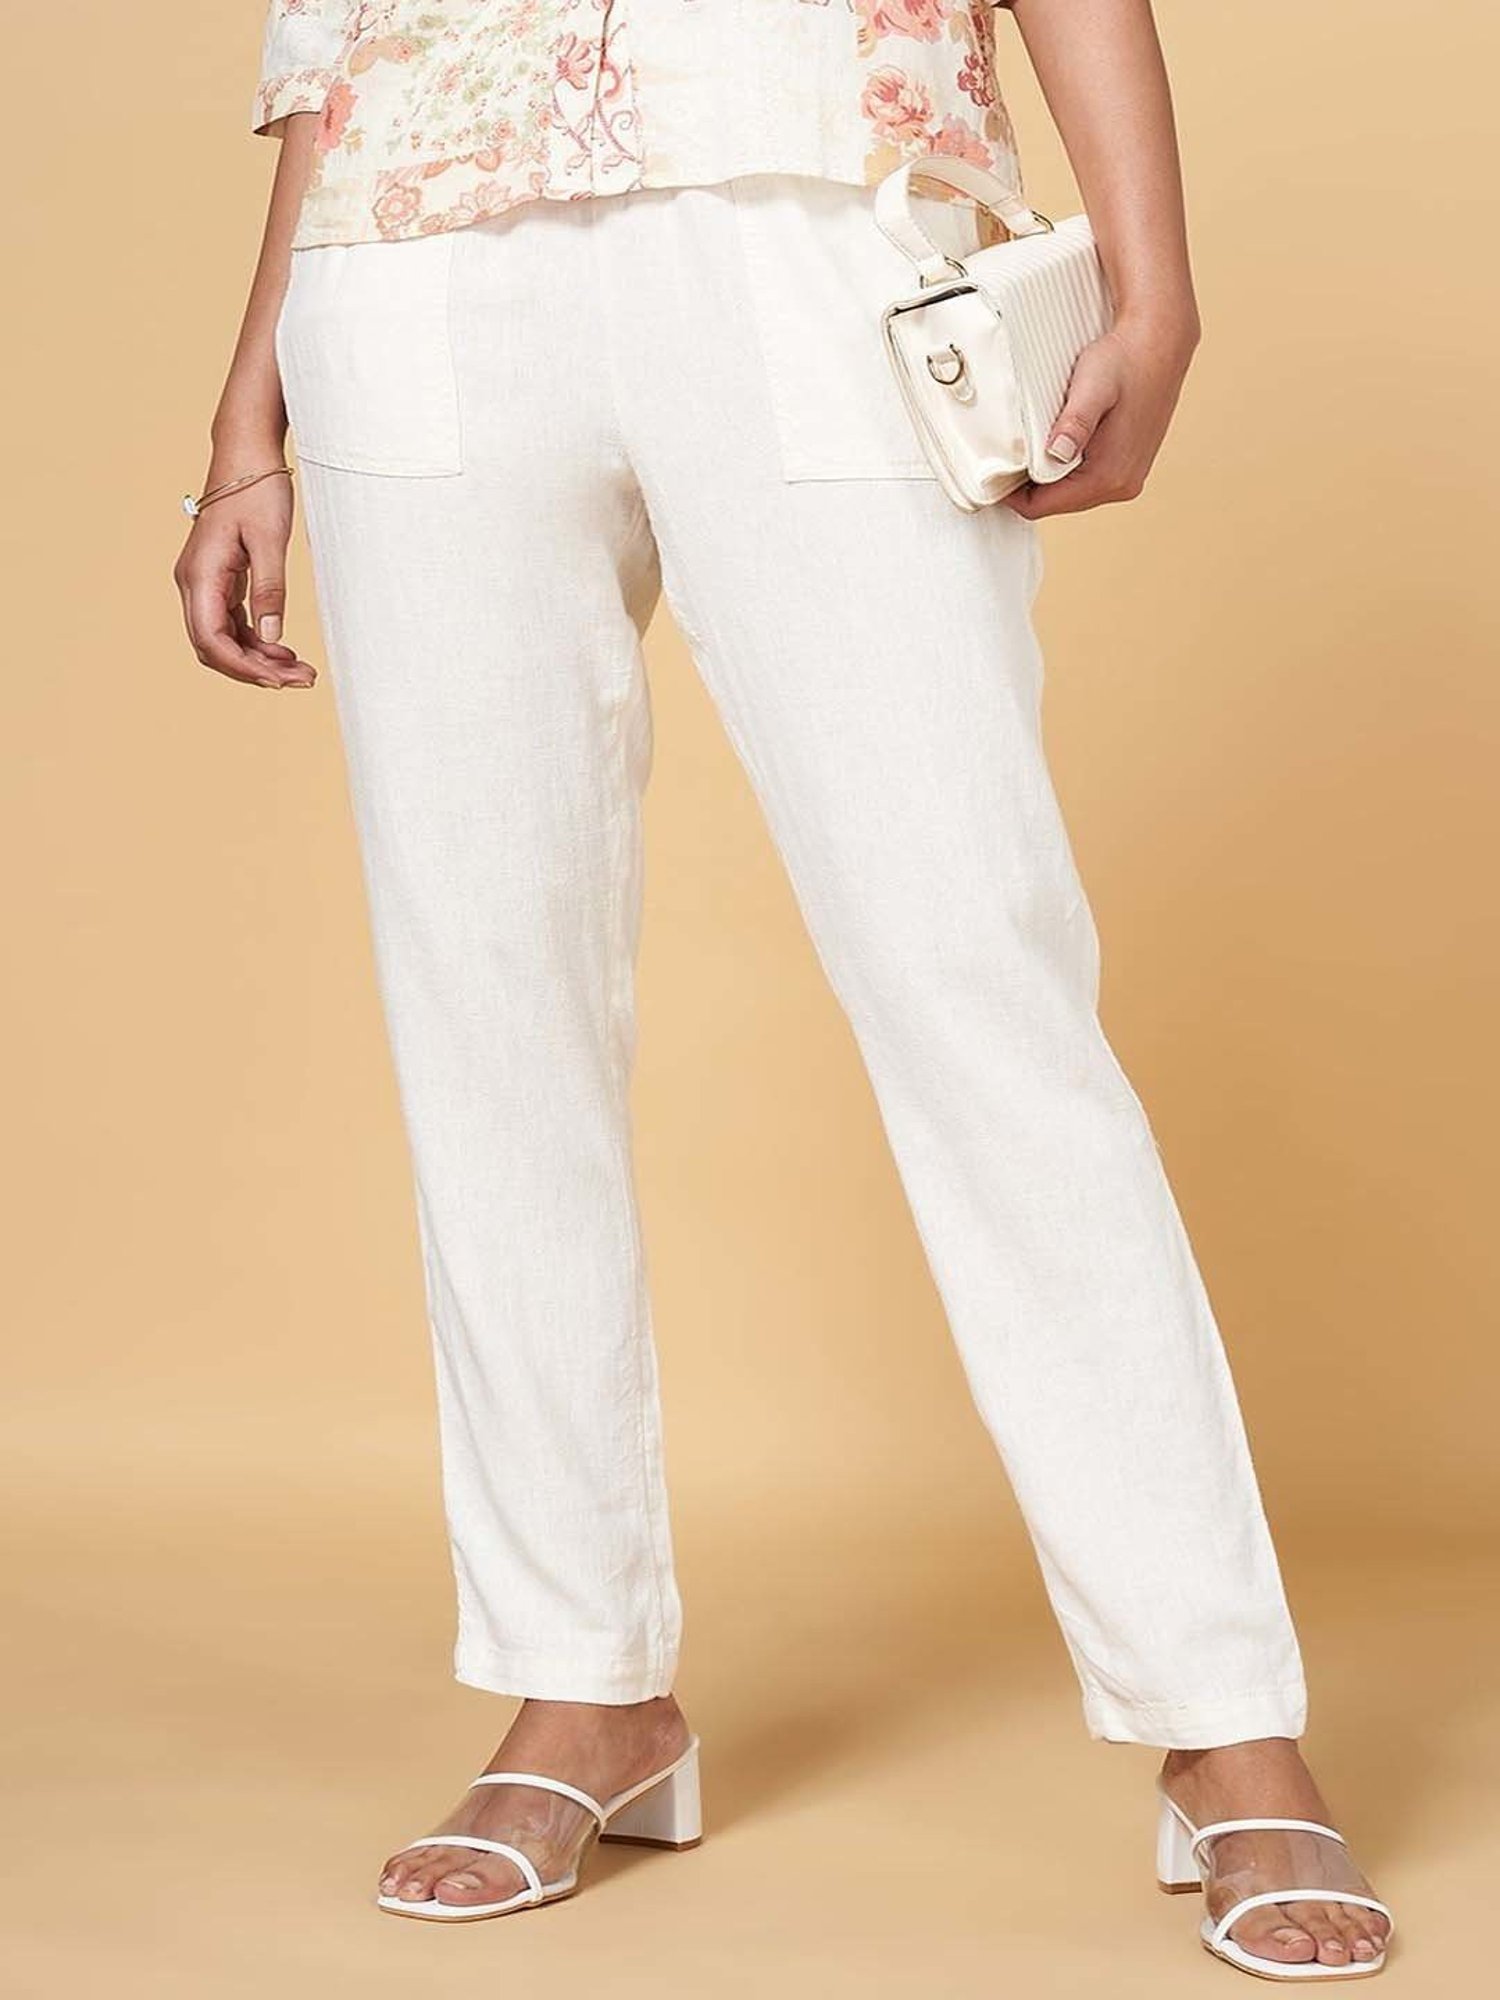 arkitaip  The Wabi Pleated Linen Trousers in offwhite  arkitaip